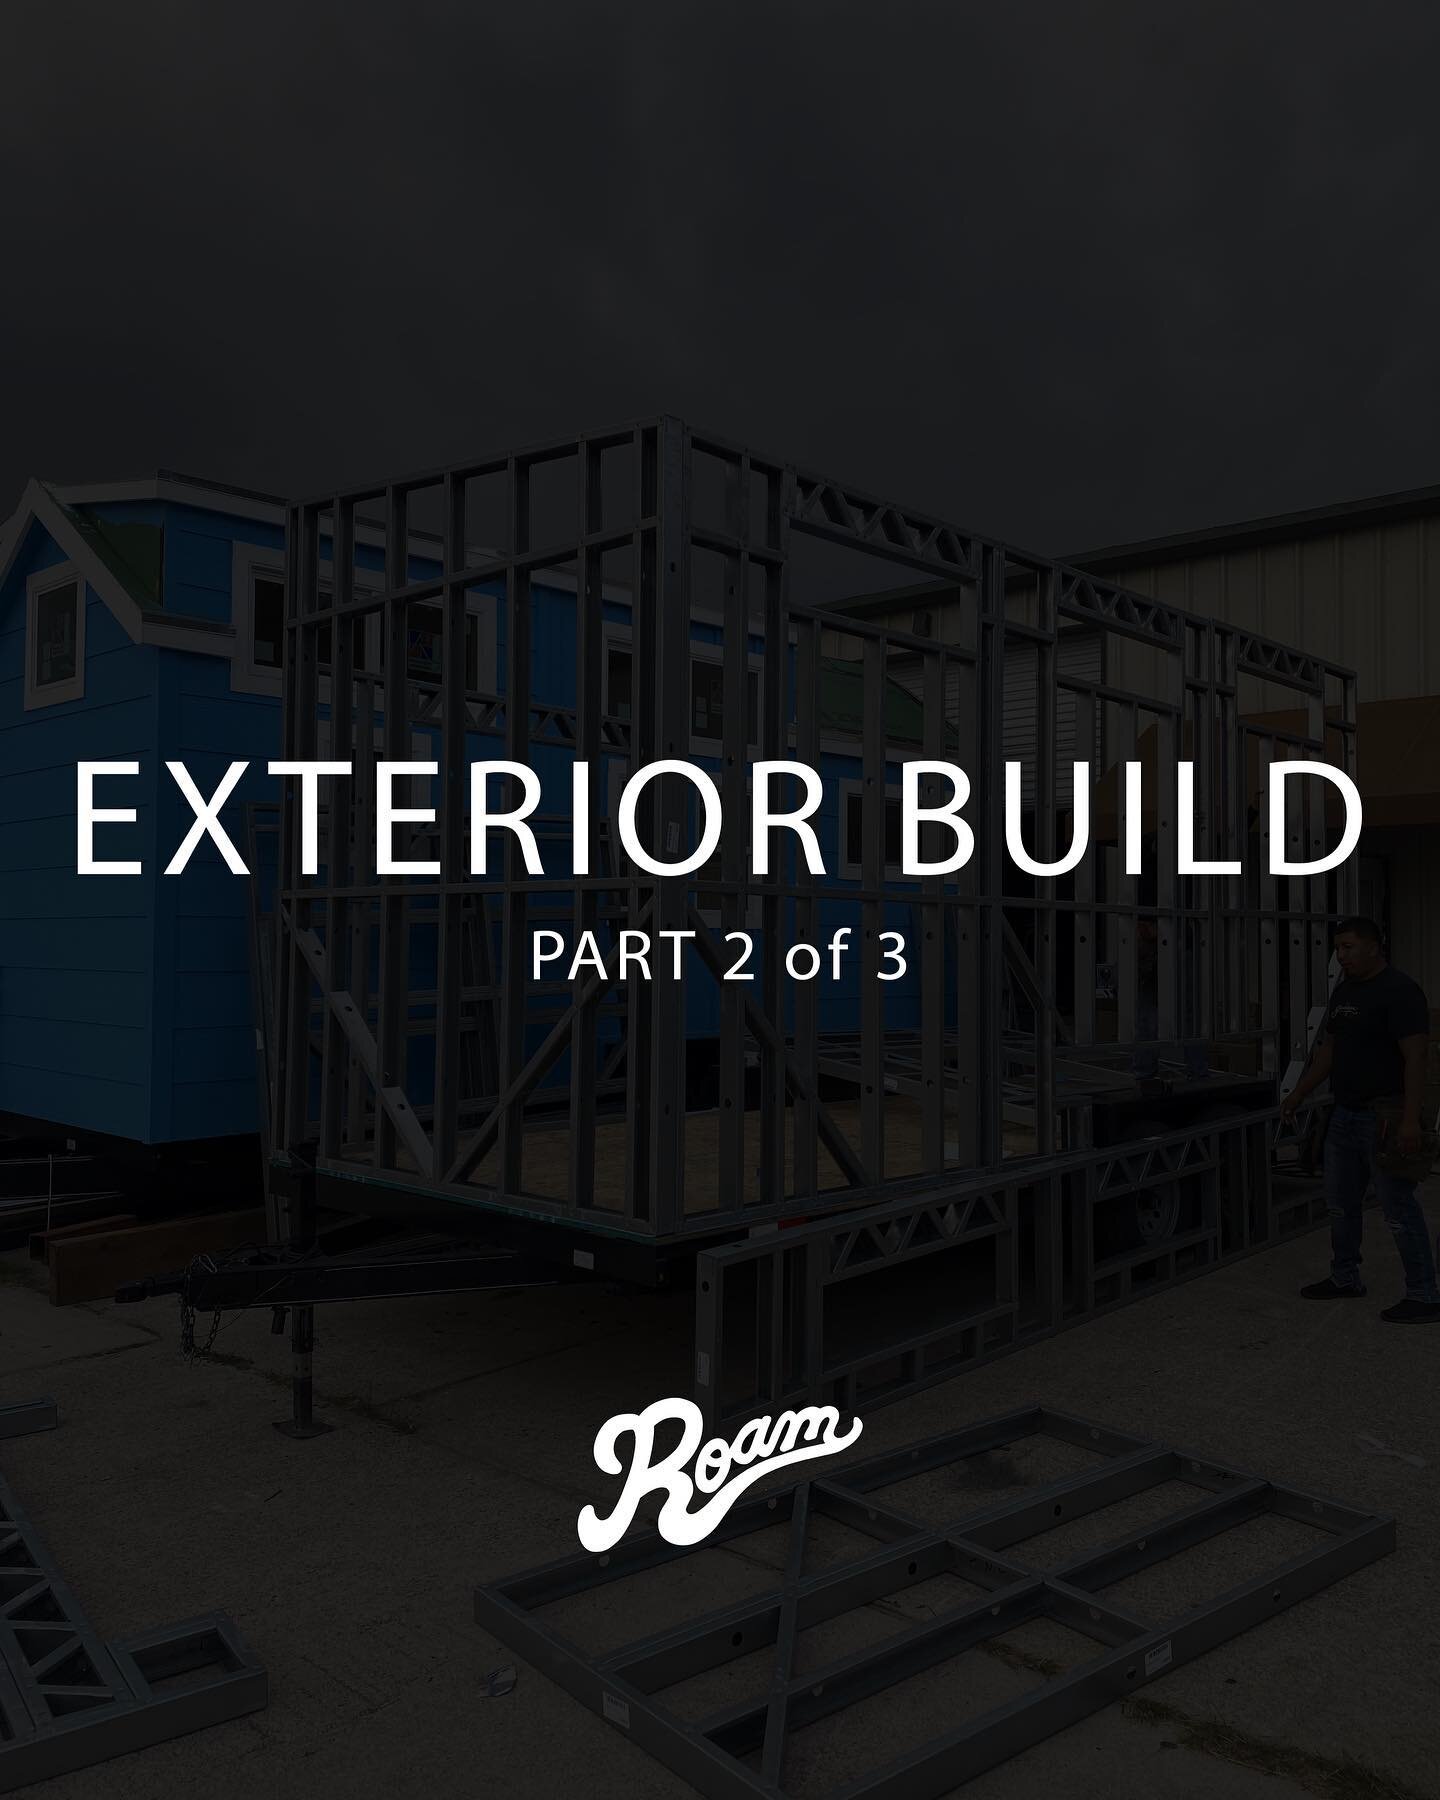 Part 2 of 3 &mdash; Exterior build

We worked with 2 local Austin companies on the Roam exterior build out. For the framing&hellip;in order to shave a few lbs off the overall trailer weight we decided to go with a custom agile framing system from @vo